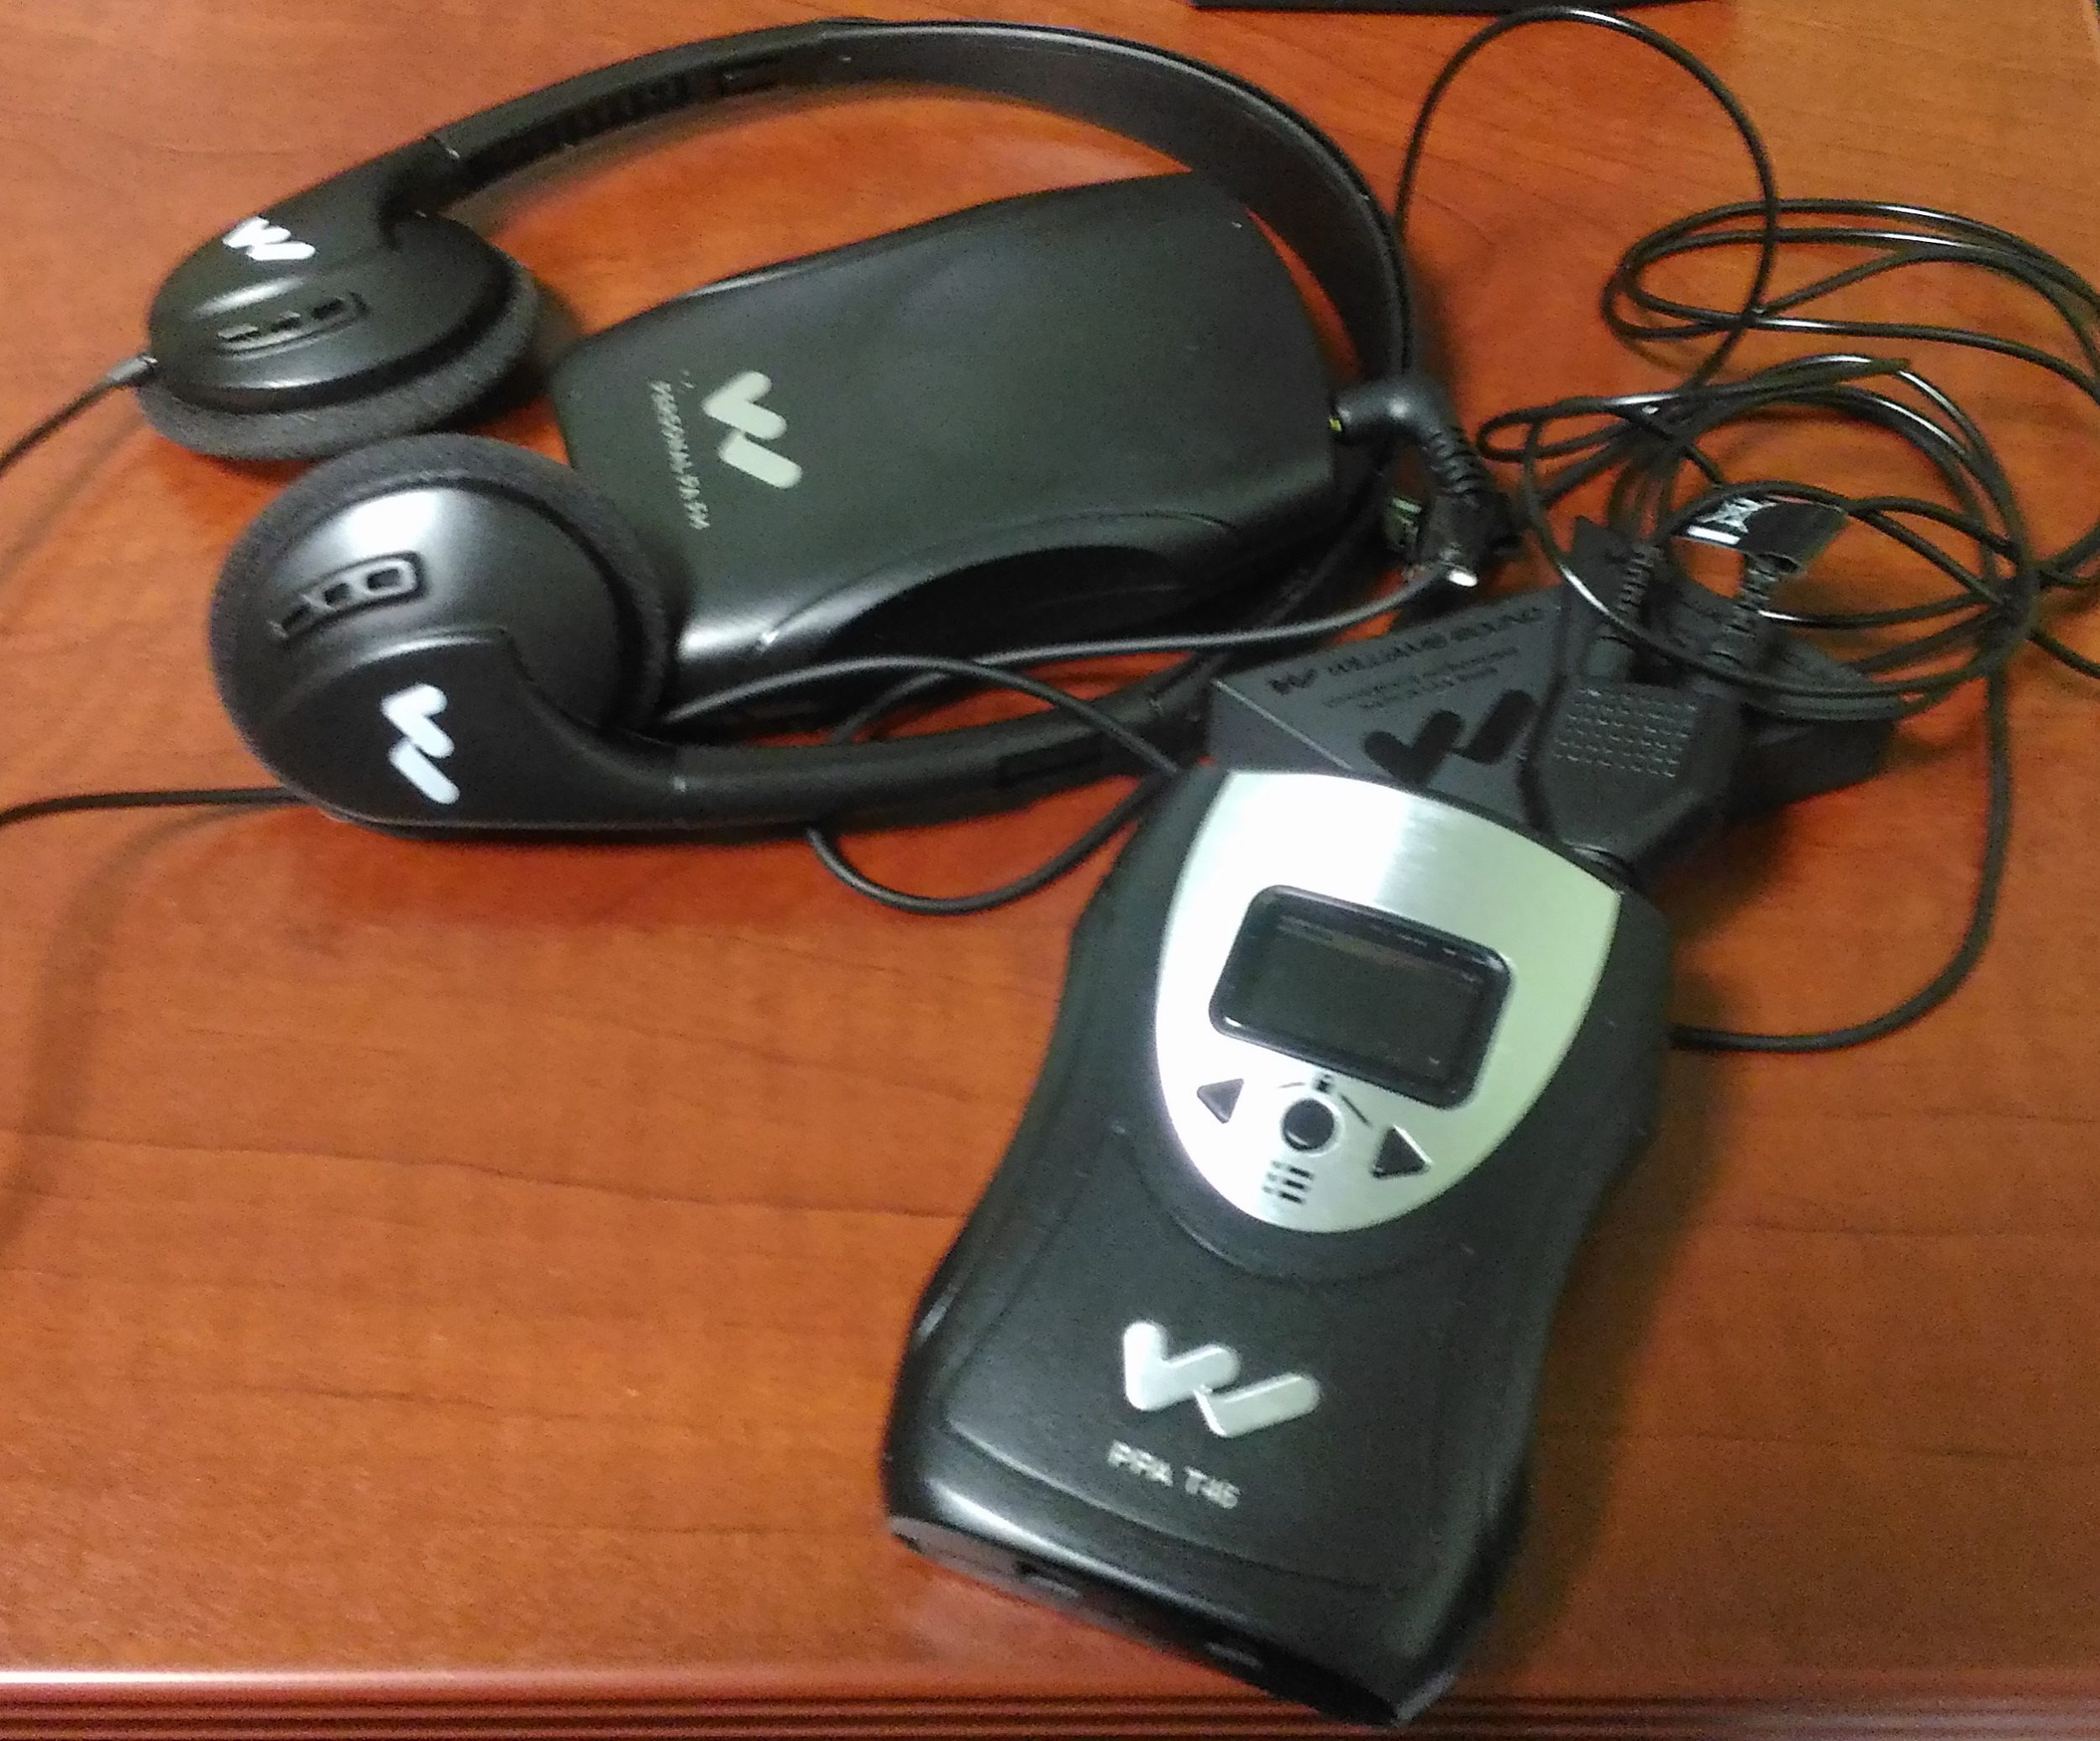 Assistive Listening System Now Available!